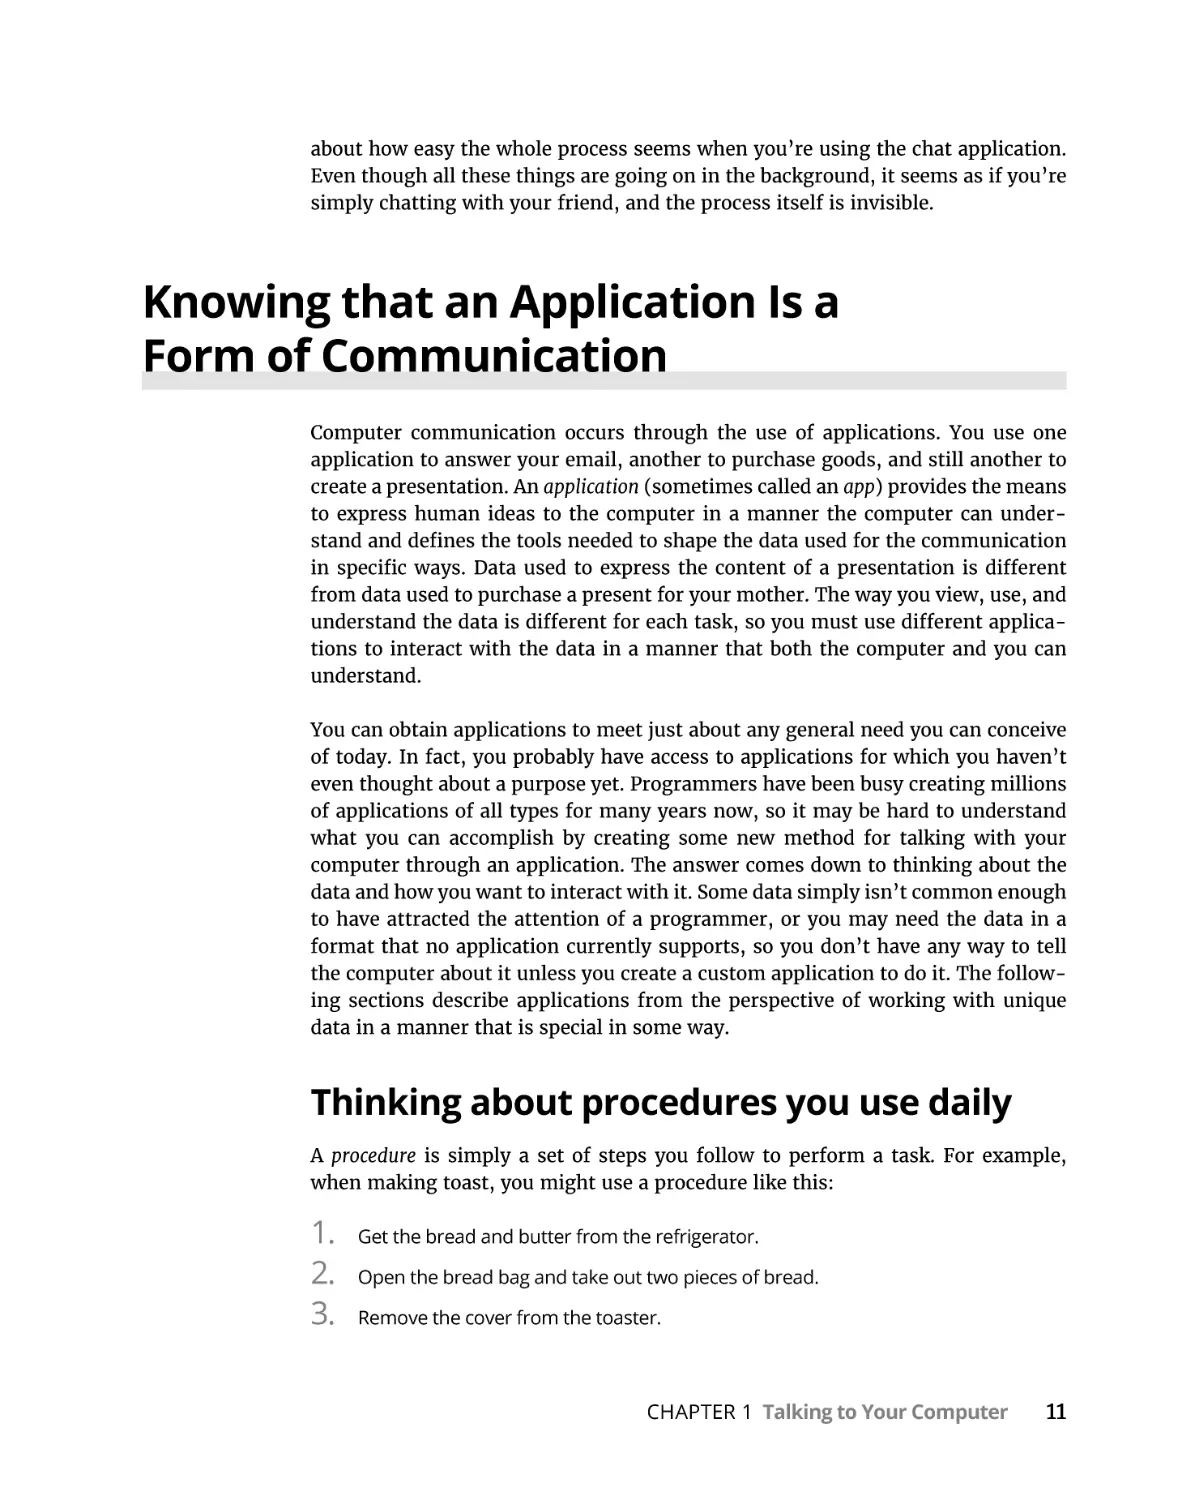 Knowing that an Application Is a Form of Communication
Thinking about procedures you use daily